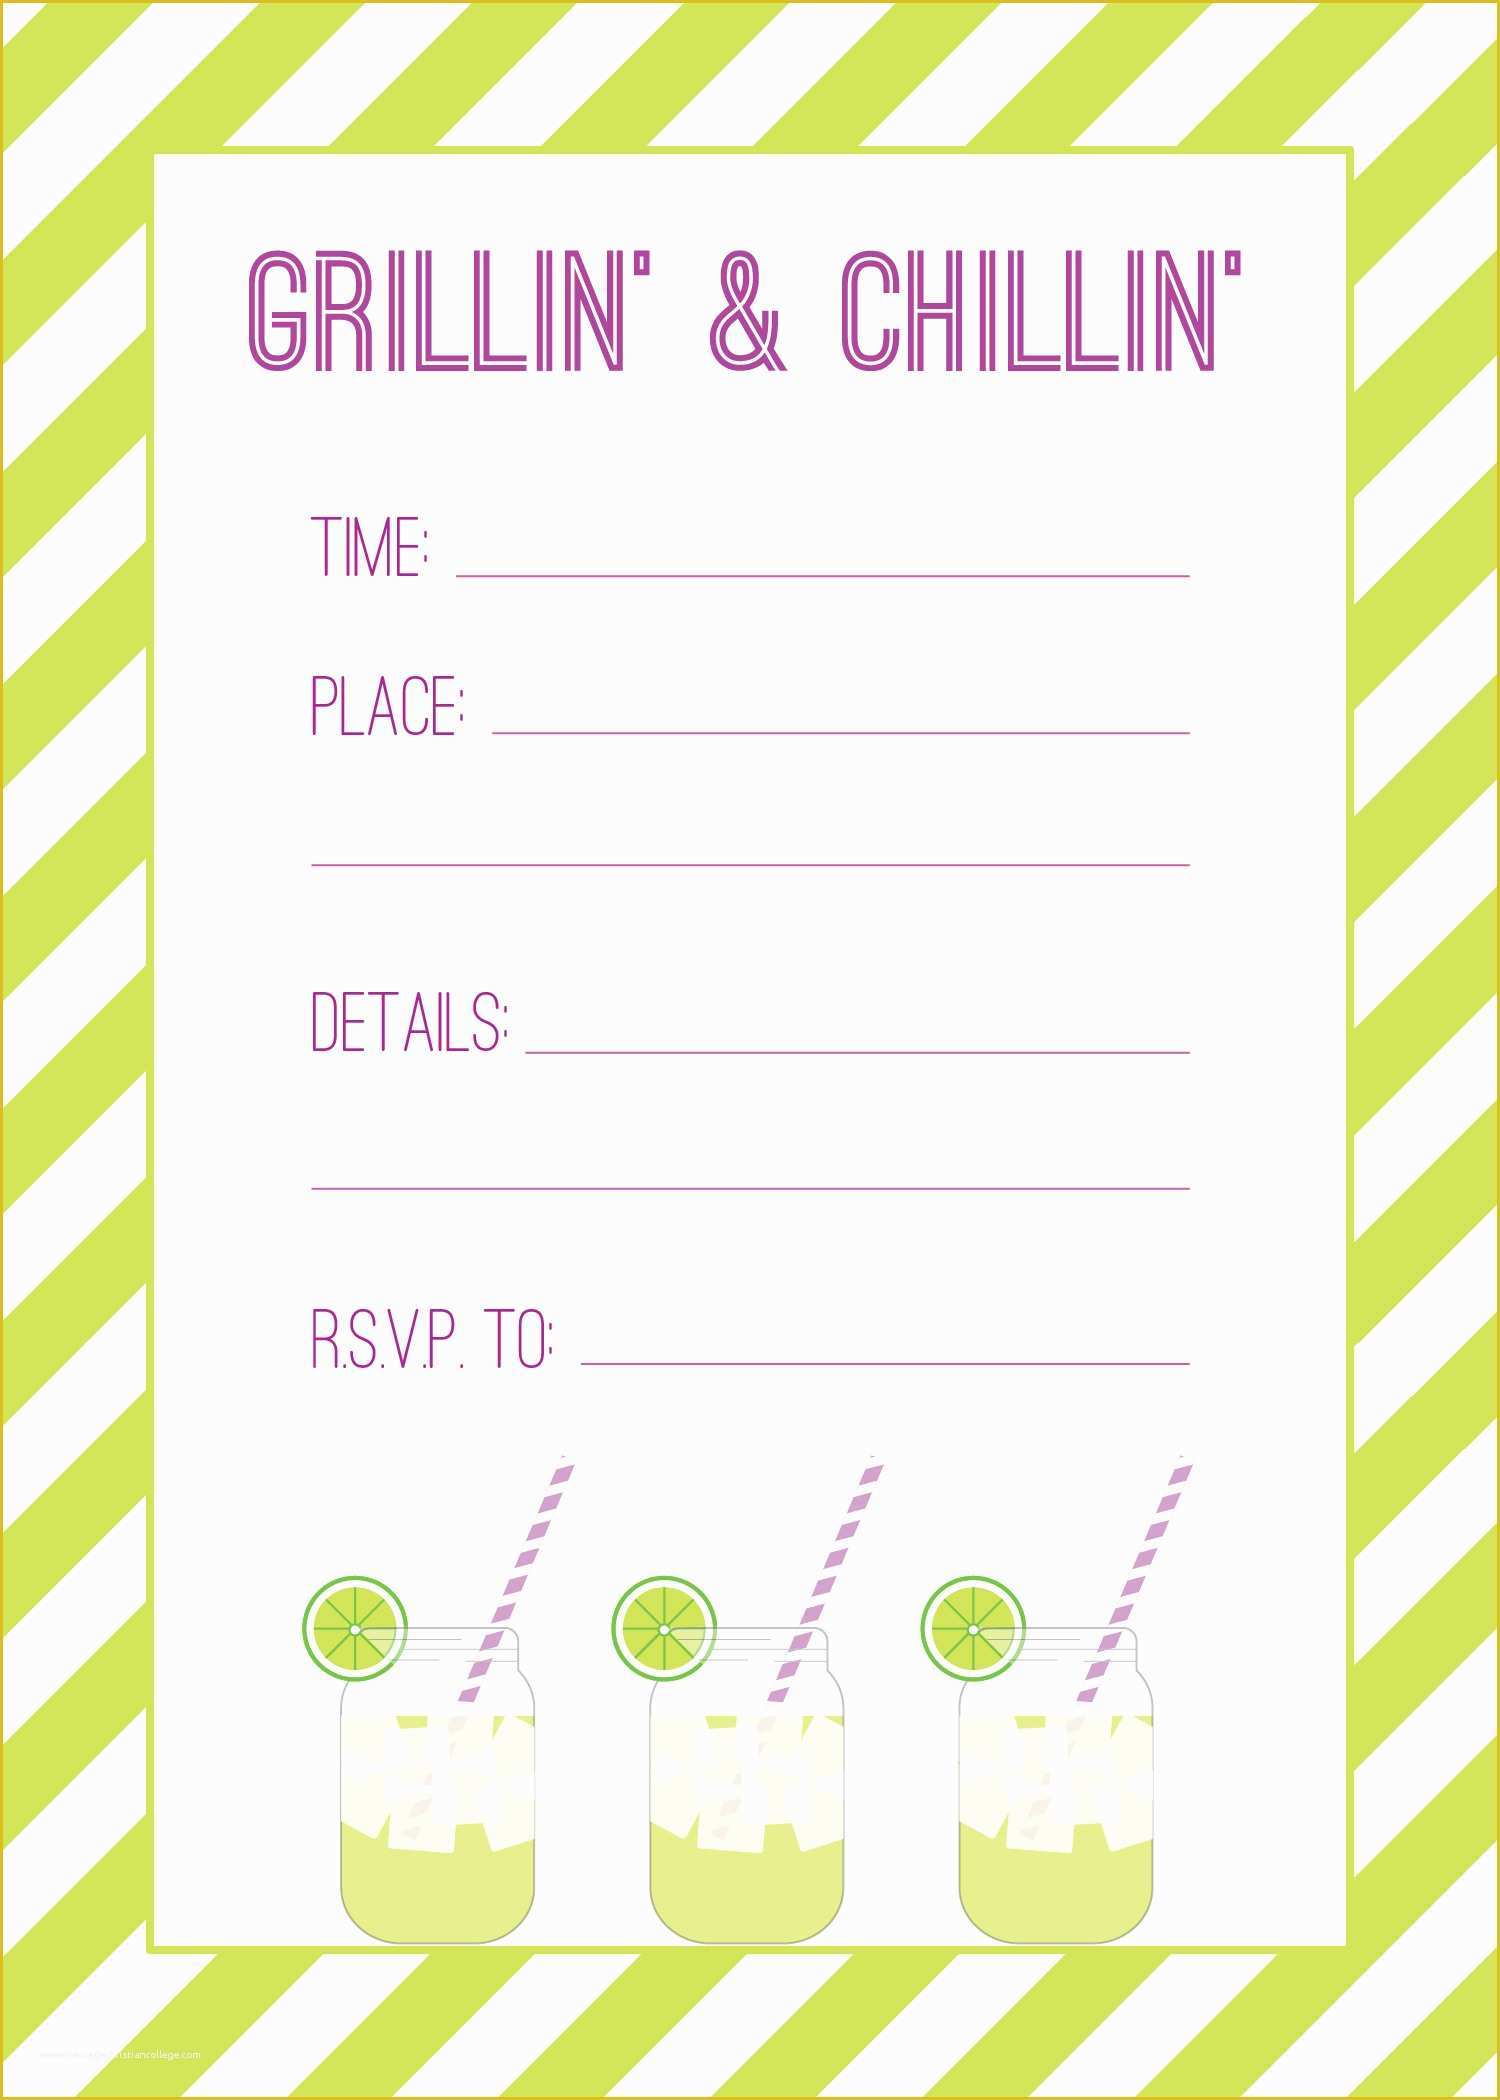 Free Printable Birthday Invitation Cards Templates Of Grillin’ & Chillin’ – Free Printable Cook Out Invitations